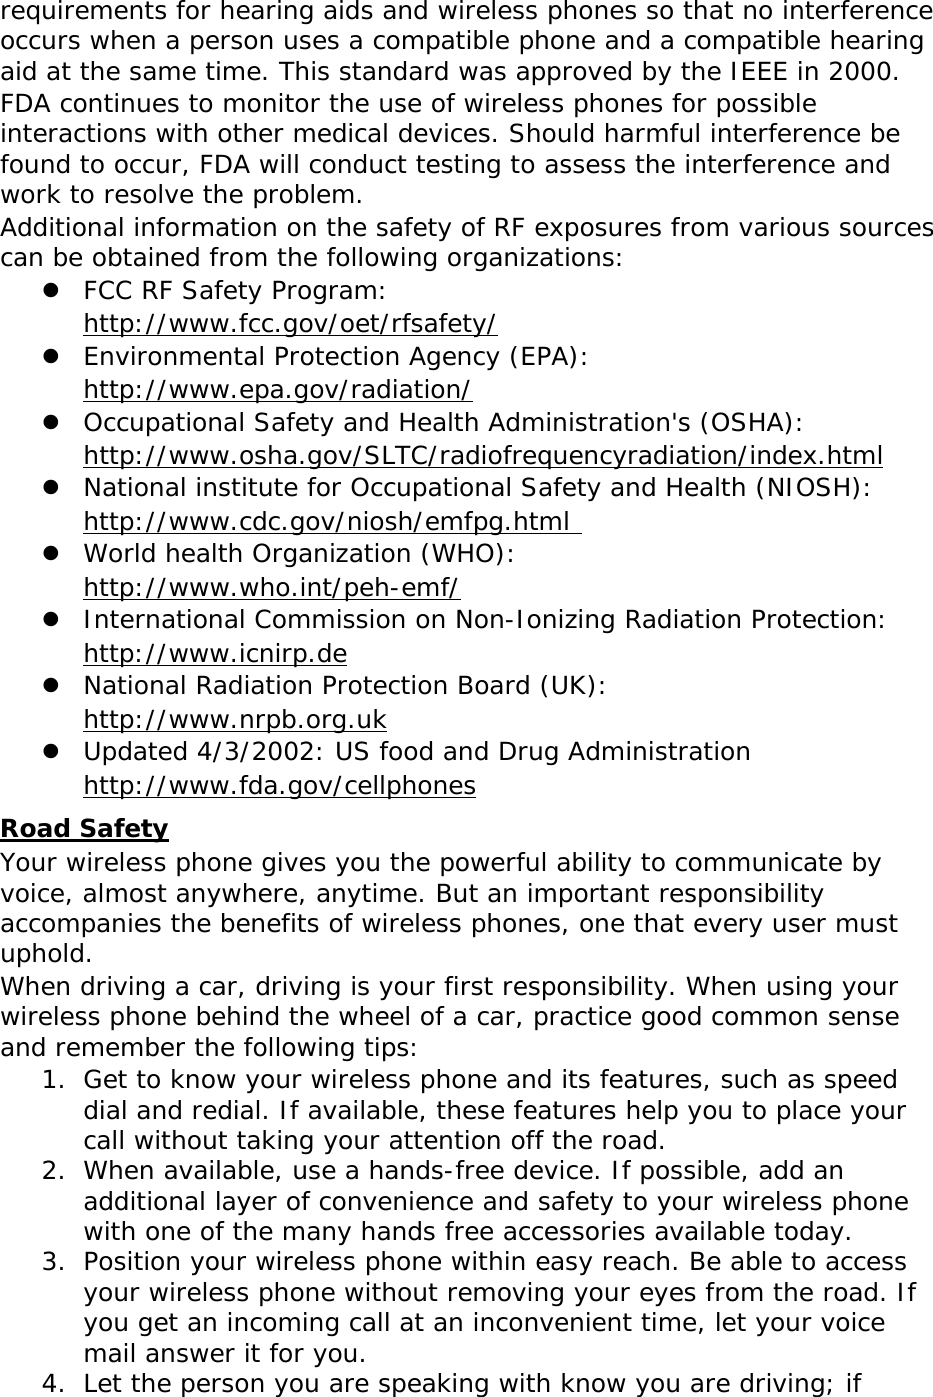 requirements for hearing aids and wireless phones so that no interference occurs when a person uses a compatible phone and a compatible hearing aid at the same time. This standard was approved by the IEEE in 2000.FDA continues to monitor the use of wireless phones for possible interactions with other medical devices. Should harmful interference be found to occur, FDA will conduct testing to assess the interference and work to resolve the problem.Additional information on the safety of RF exposures from various sources can be obtained from the following organizations:zFCC RF Safety Program: http://www.fcc.gov/oet/rfsafety/zEnvironmental Protection Agency (EPA):  http://www.epa.gov/radiation/zOccupational Safety and Health Administration&apos;s (OSHA):        http://www.osha.gov/SLTC/radiofrequencyradiation/index.htmlzNational institute for Occupational Safety and Health (NIOSH):  http://www.cdc.gov/niosh/emfpg.html zWorld health Organization (WHO):  http://www.who.int/peh-emf/zInternational Commission on Non-Ionizing Radiation Protection:  http://www.icnirp.dezNational Radiation Protection Board (UK):  http://www.nrpb.org.ukzUpdated 4/3/2002: US food and Drug Administration  http://www.fda.gov/cellphonesRoad SafetyYour wireless phone gives you the powerful ability to communicate by voice, almost anywhere, anytime. But an important responsibility accompanies the benefits of wireless phones, one that every user must uphold.When driving a car, driving is your first responsibility. When using your wireless phone behind the wheel of a car, practice good common sense and remember the following tips:1. Get to know your wireless phone and its features, such as speed dial and redial. If available, these features help you to place your call without taking your attention off the road. 2. When available, use a hands-free device. If possible, add an additional layer of convenience and safety to your wireless phone with one of the many hands free accessories available today. 3. Position your wireless phone within easy reach. Be able to access your wireless phone without removing your eyes from the road. If you get an incoming call at an inconvenient time, let your voice mail answer it for you. 4. Let the person you are speaking with know you are driving; if 